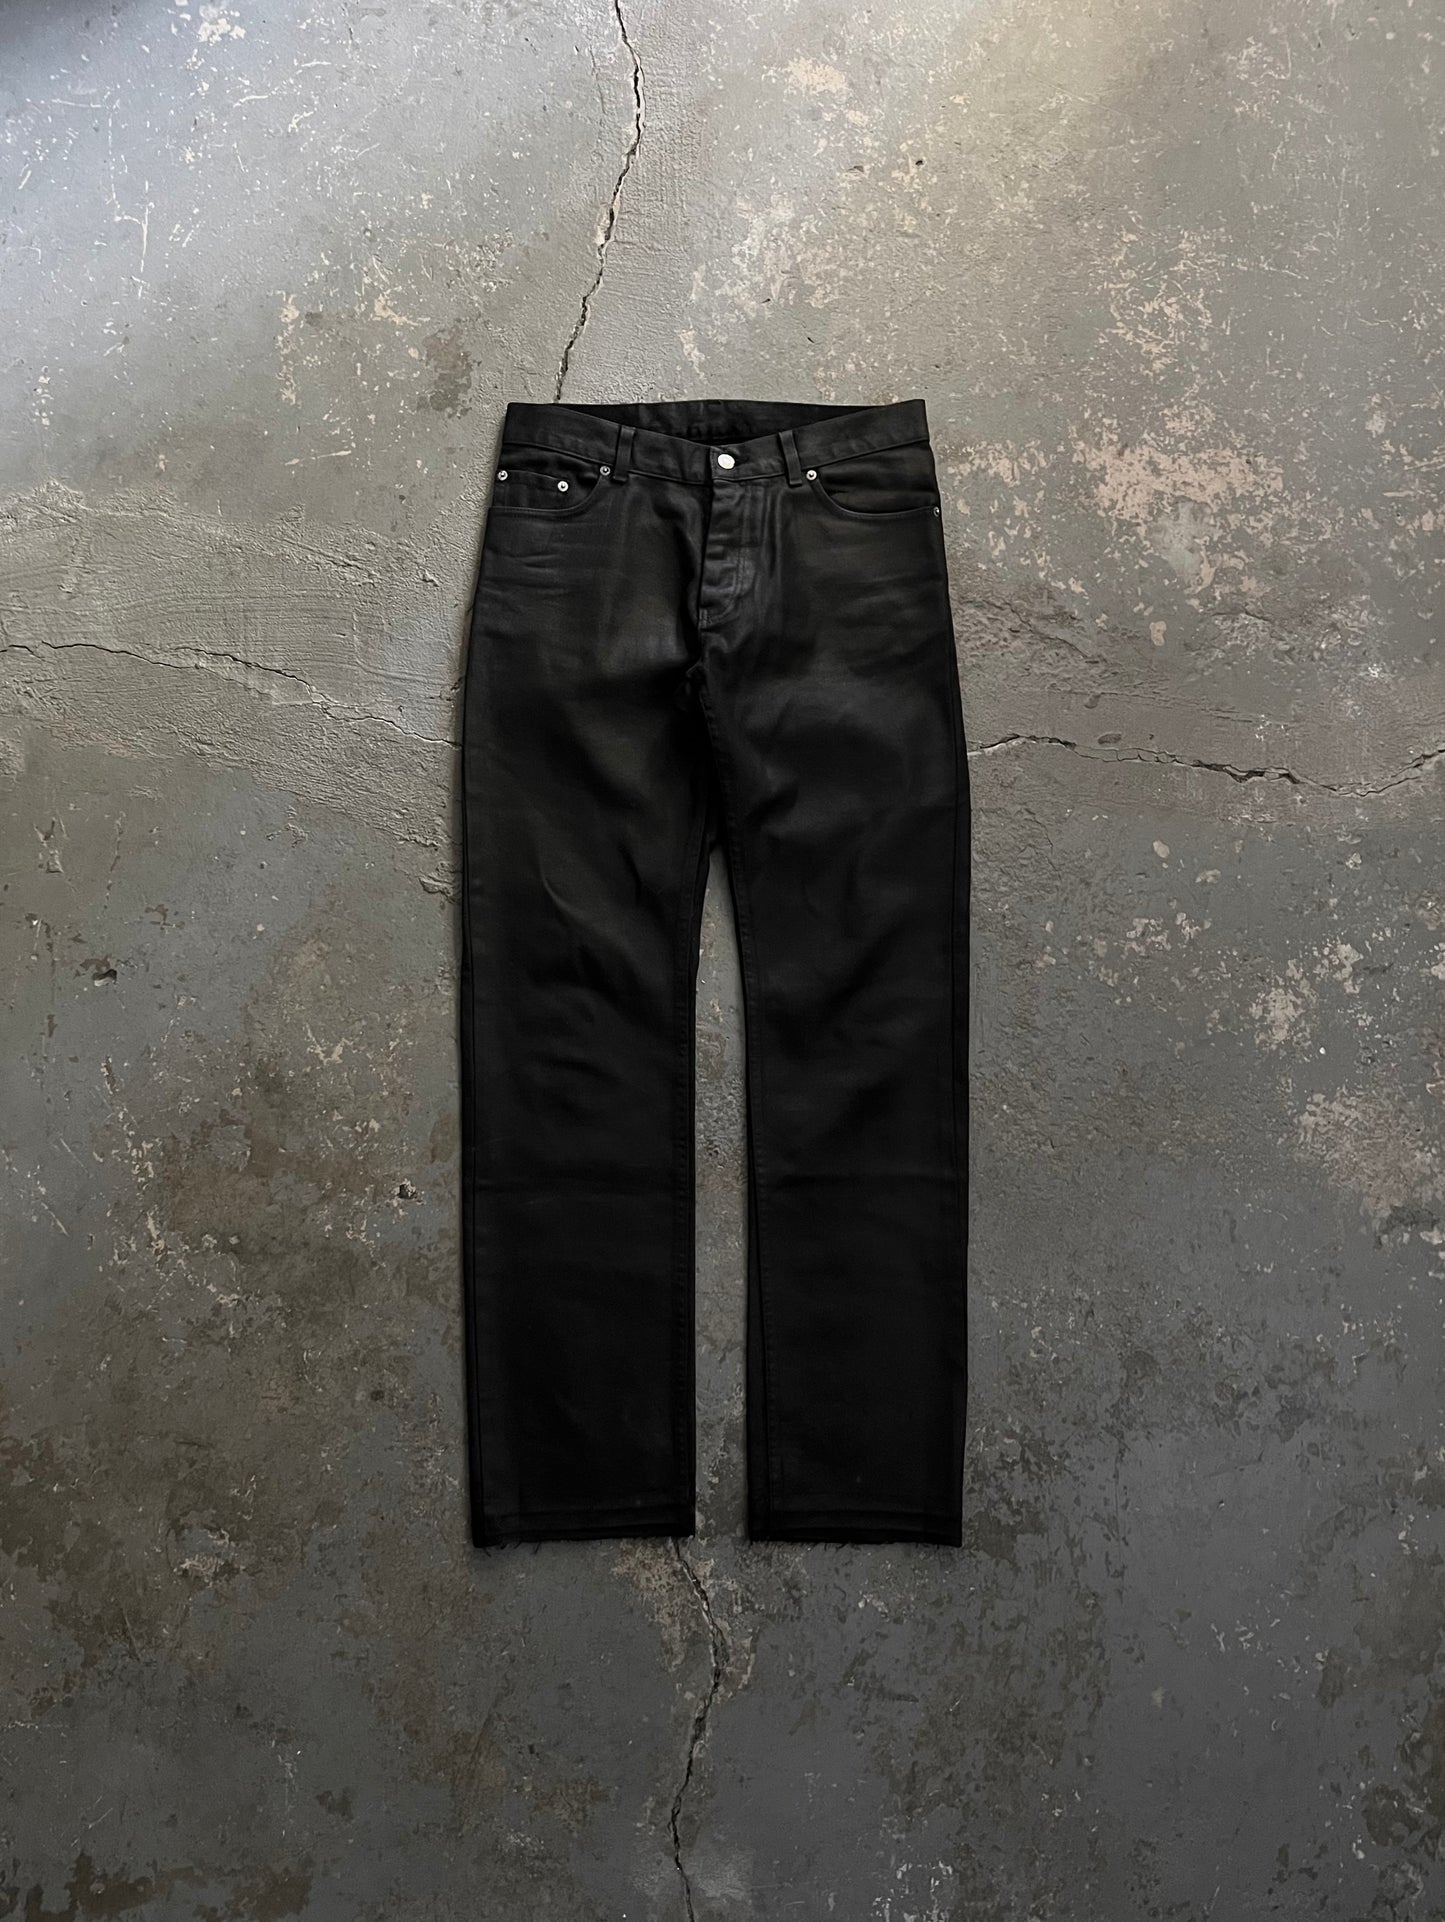 Helmut Lang SS98 Wax Coated Jeans